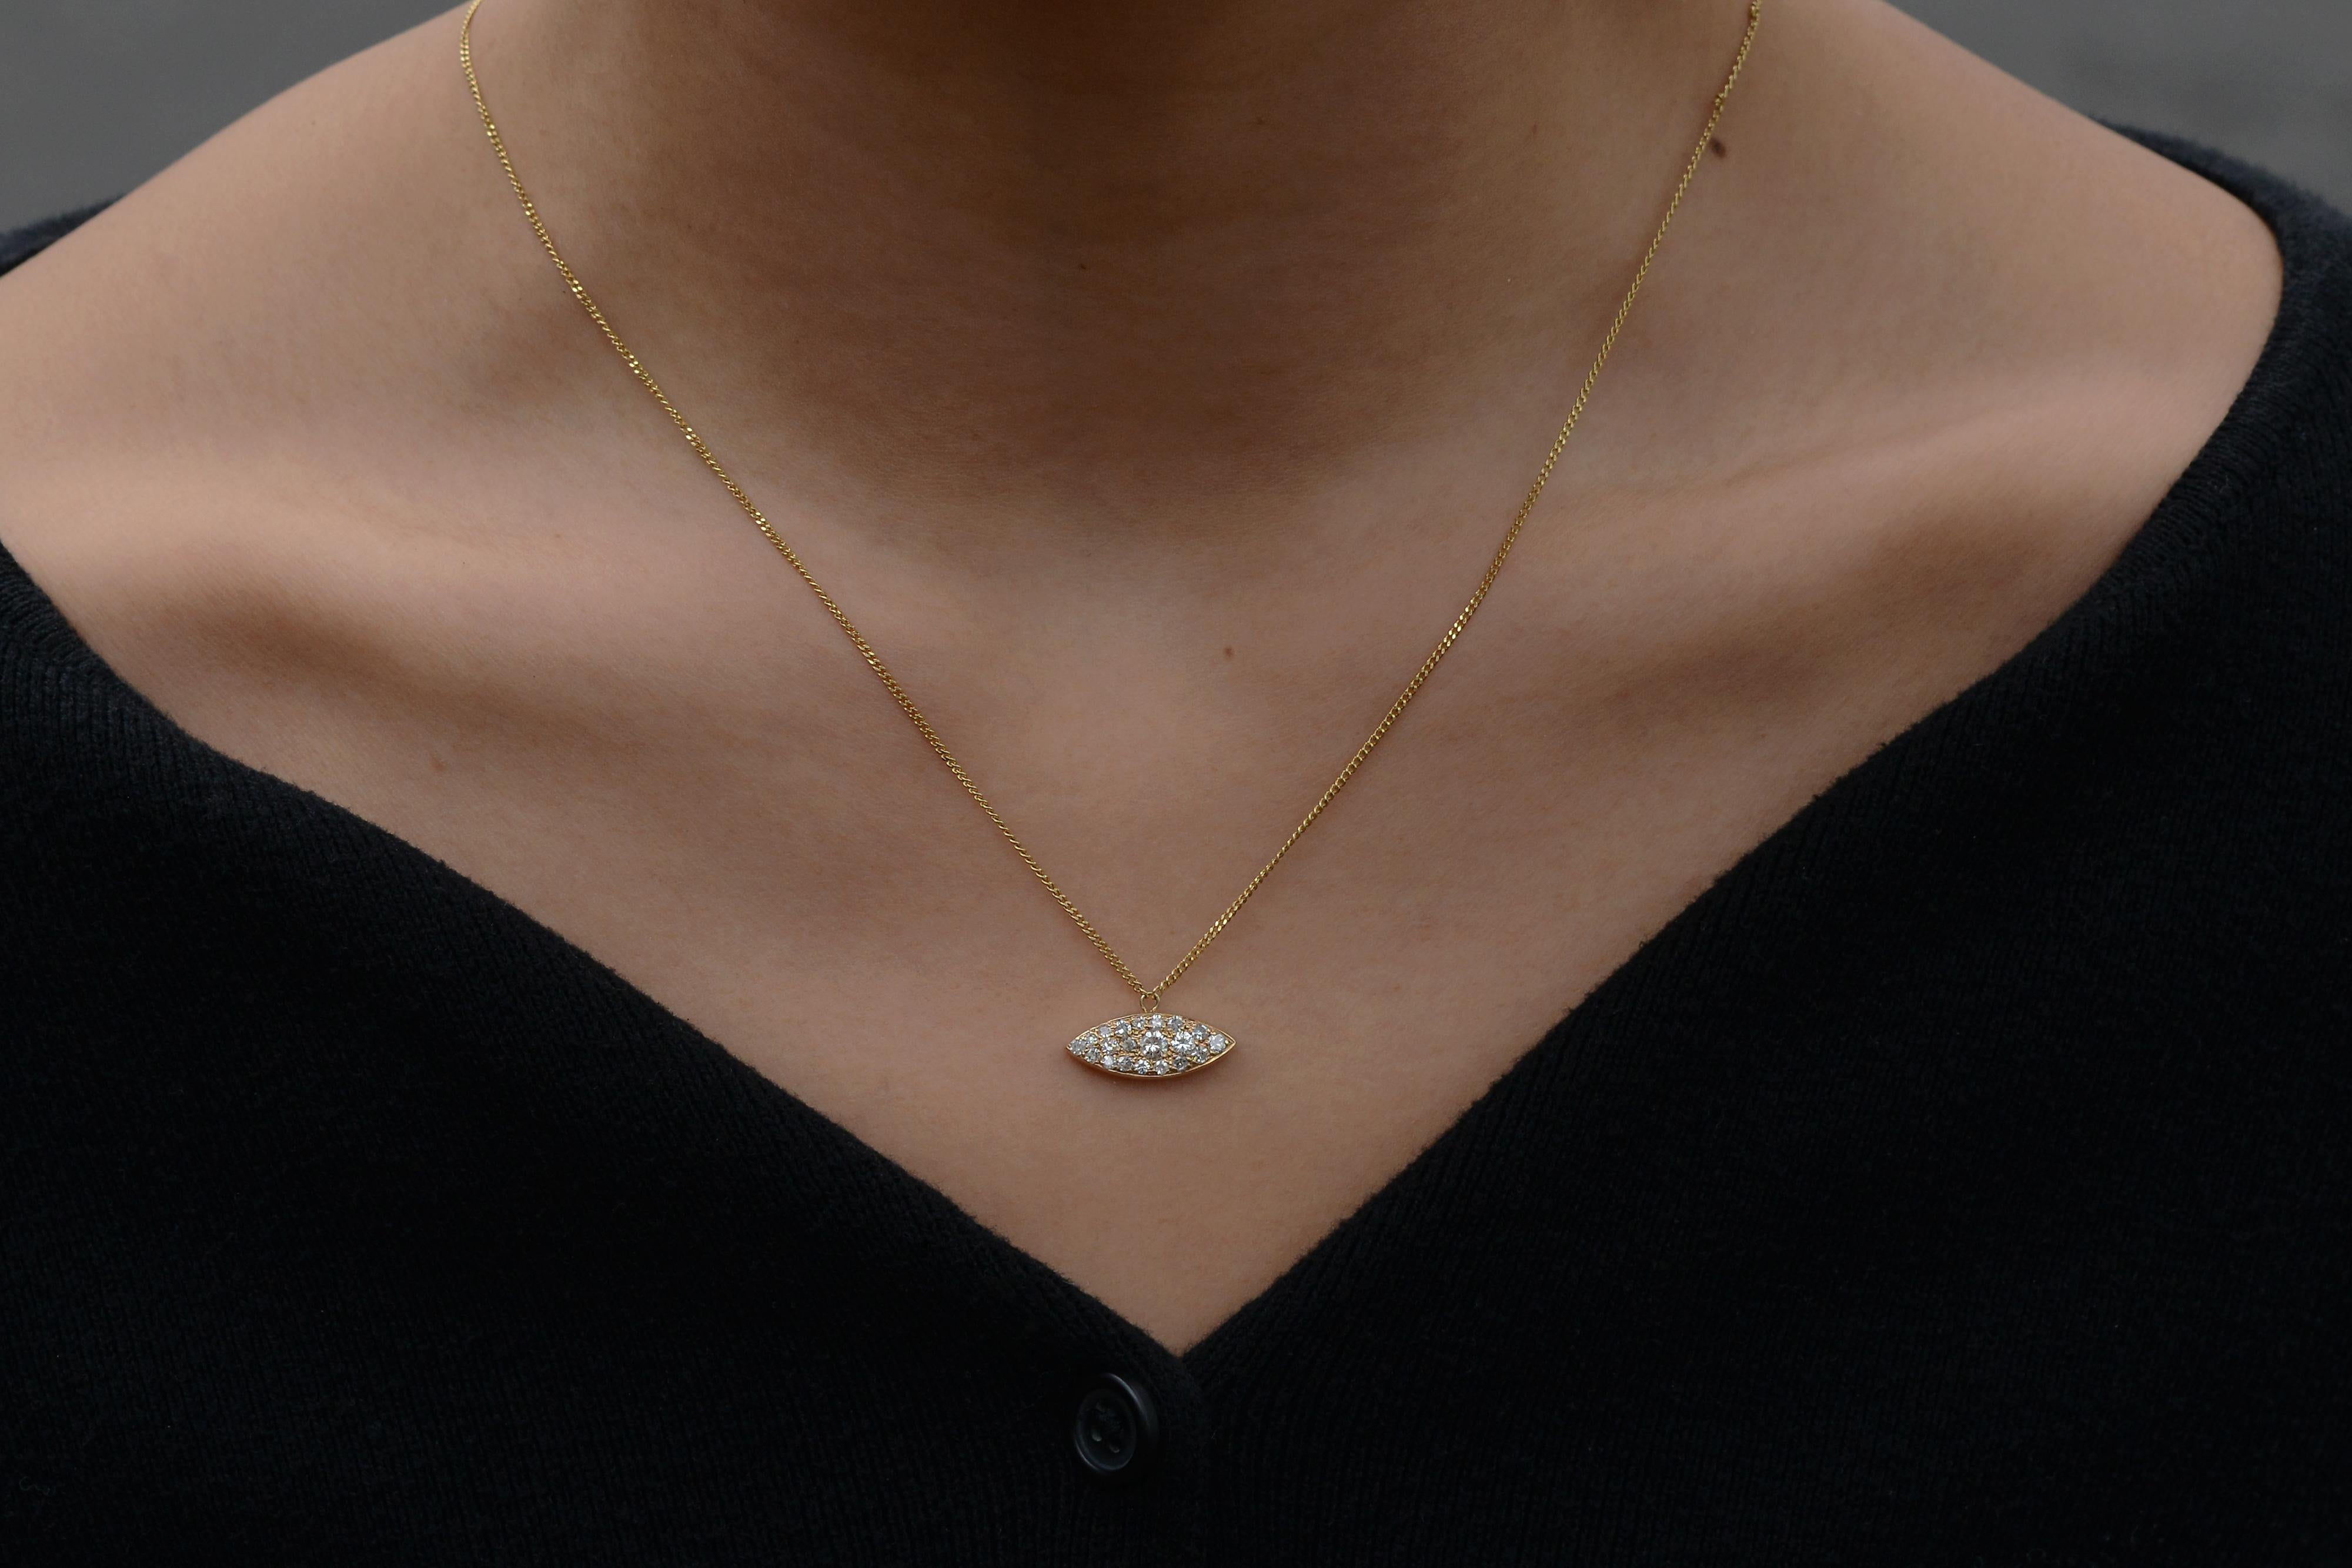 This exclusive vintage diamond necklace is perfect for those who appreciate luxurious jewelry with a sustainable, eco-friendly conscience. Made with enduring 14 karat yellow gold and over a half carat of shimmering diamonds. A flourishing estate